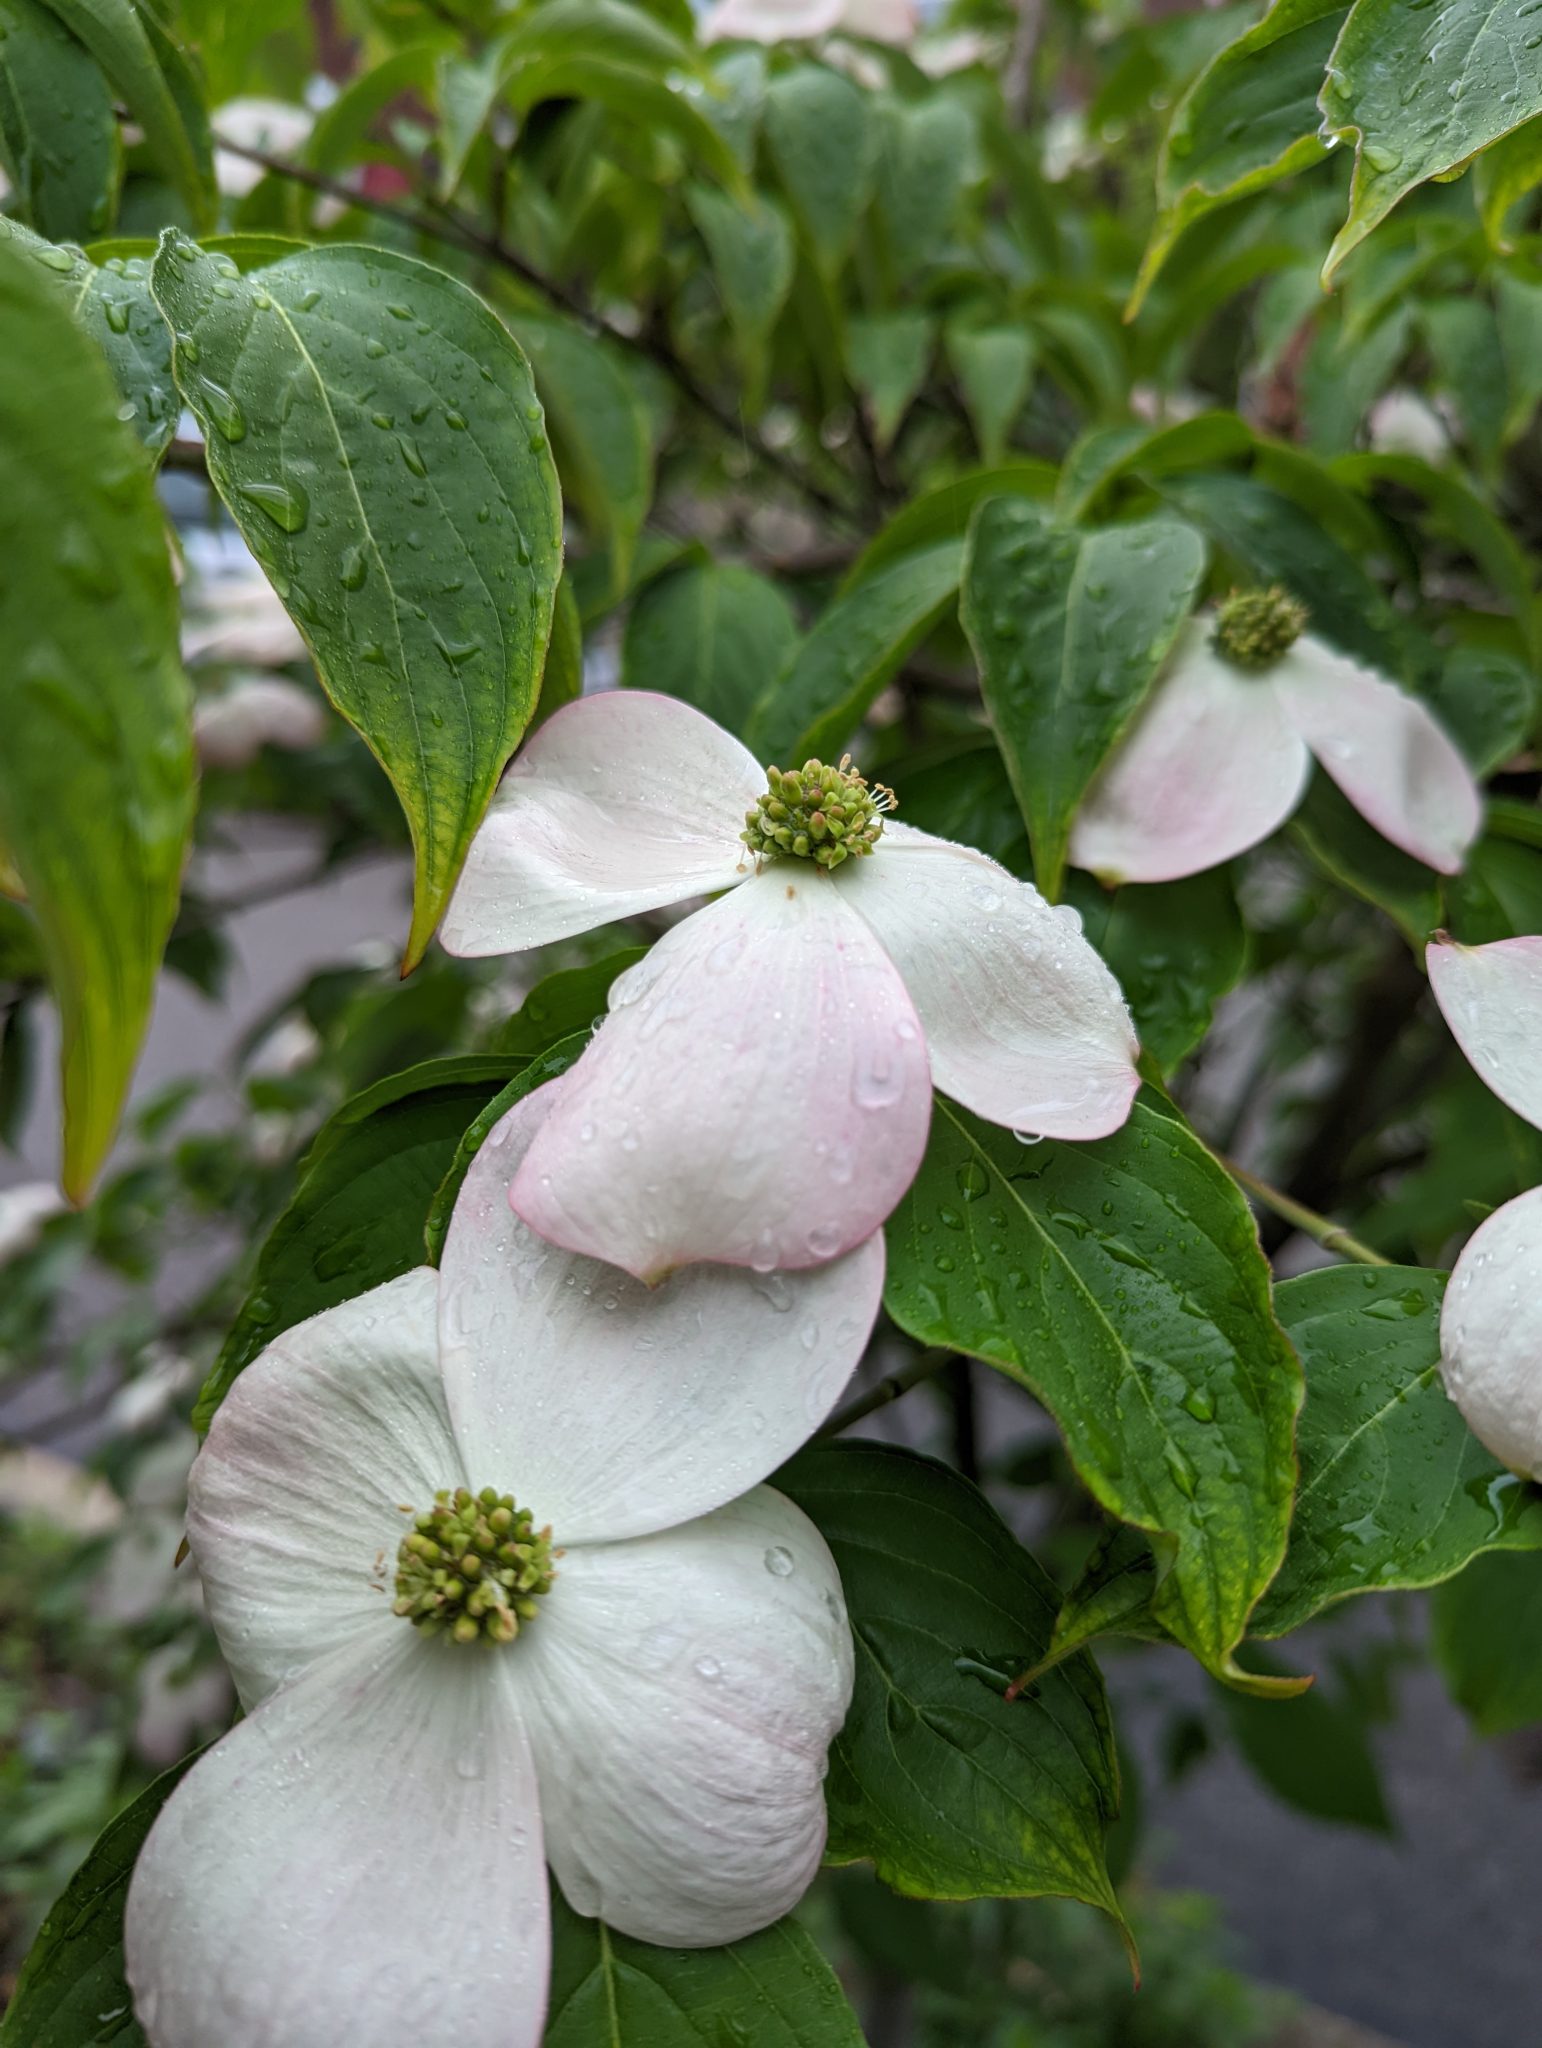 Some white flowers growing on a dogwood tree.